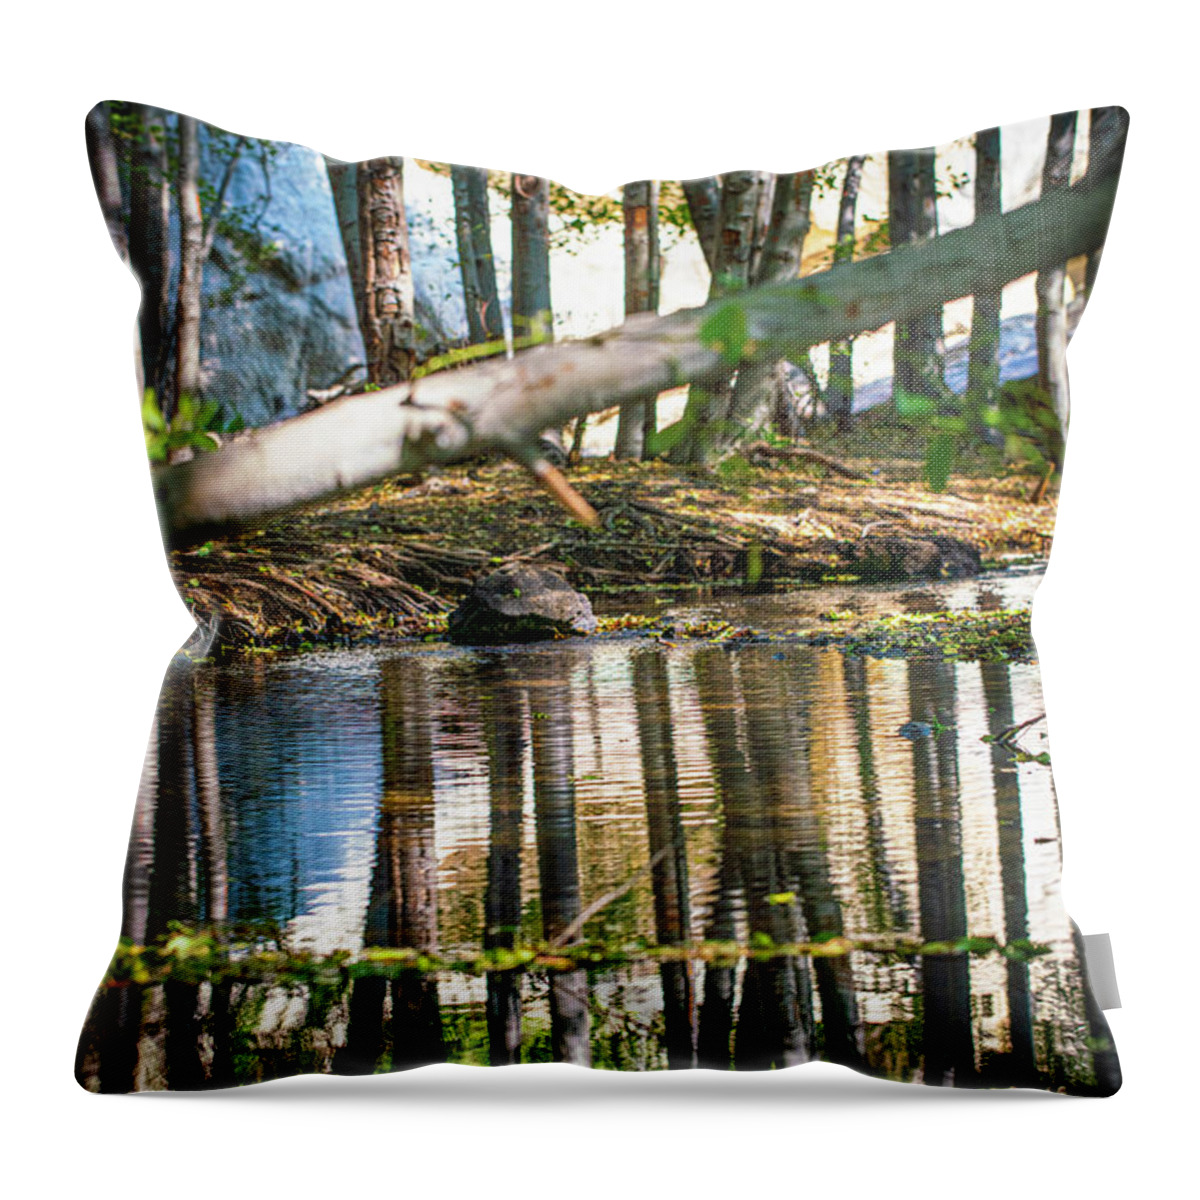 Abstract Throw Pillow featuring the photograph Waders by Ryan Weddle